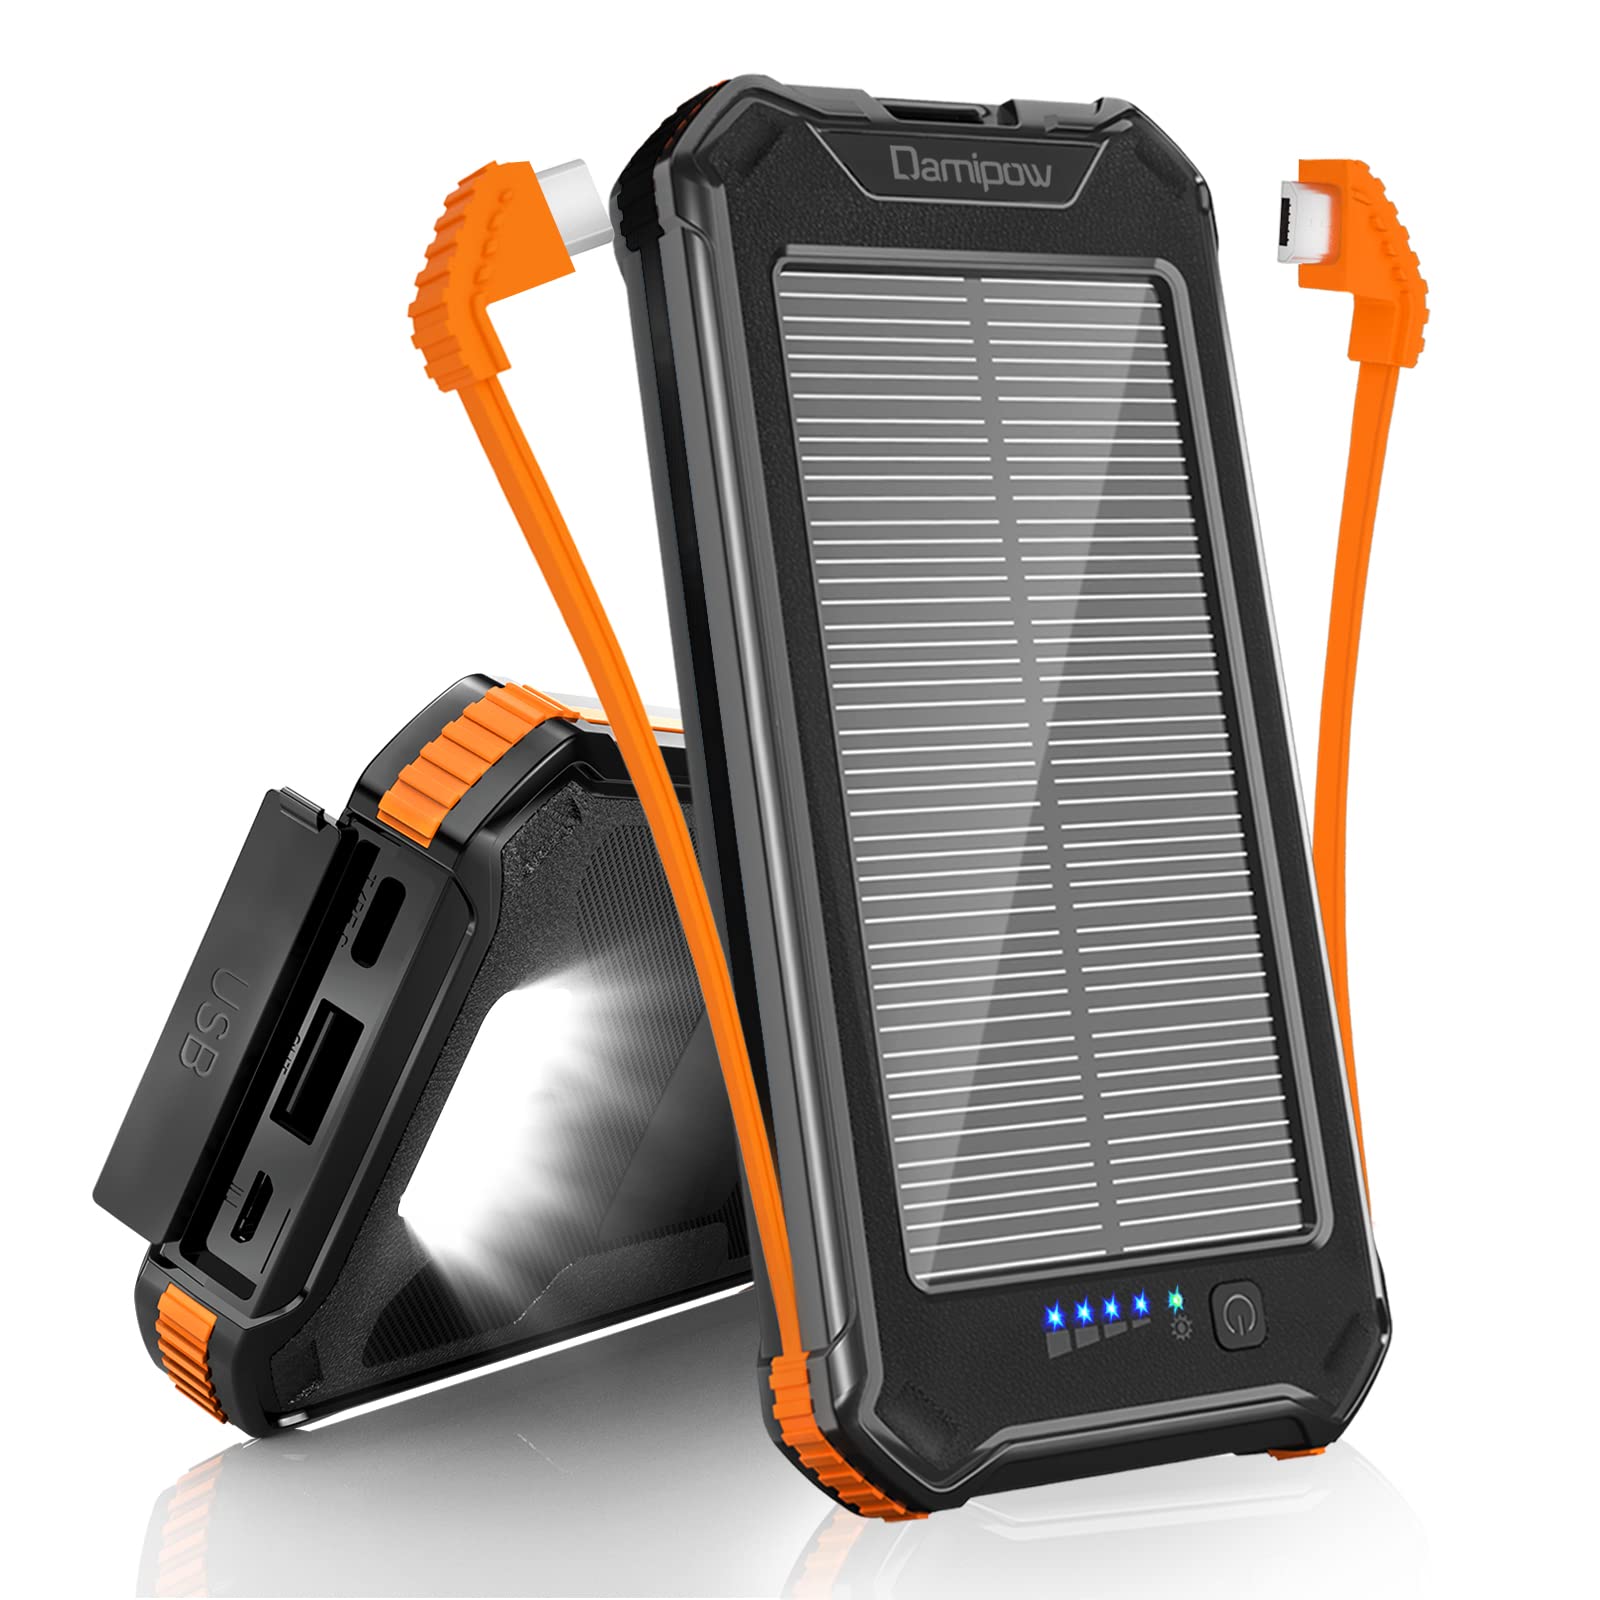 Solar Charger 20000mAh，Portable Solar Power Bank with Built-in USB B & USB C Cables,Solar Battery Charger with 3 Outputs, 2 Inputs, LED Flashlights for iPhone, iPad, Android, Tablets and More